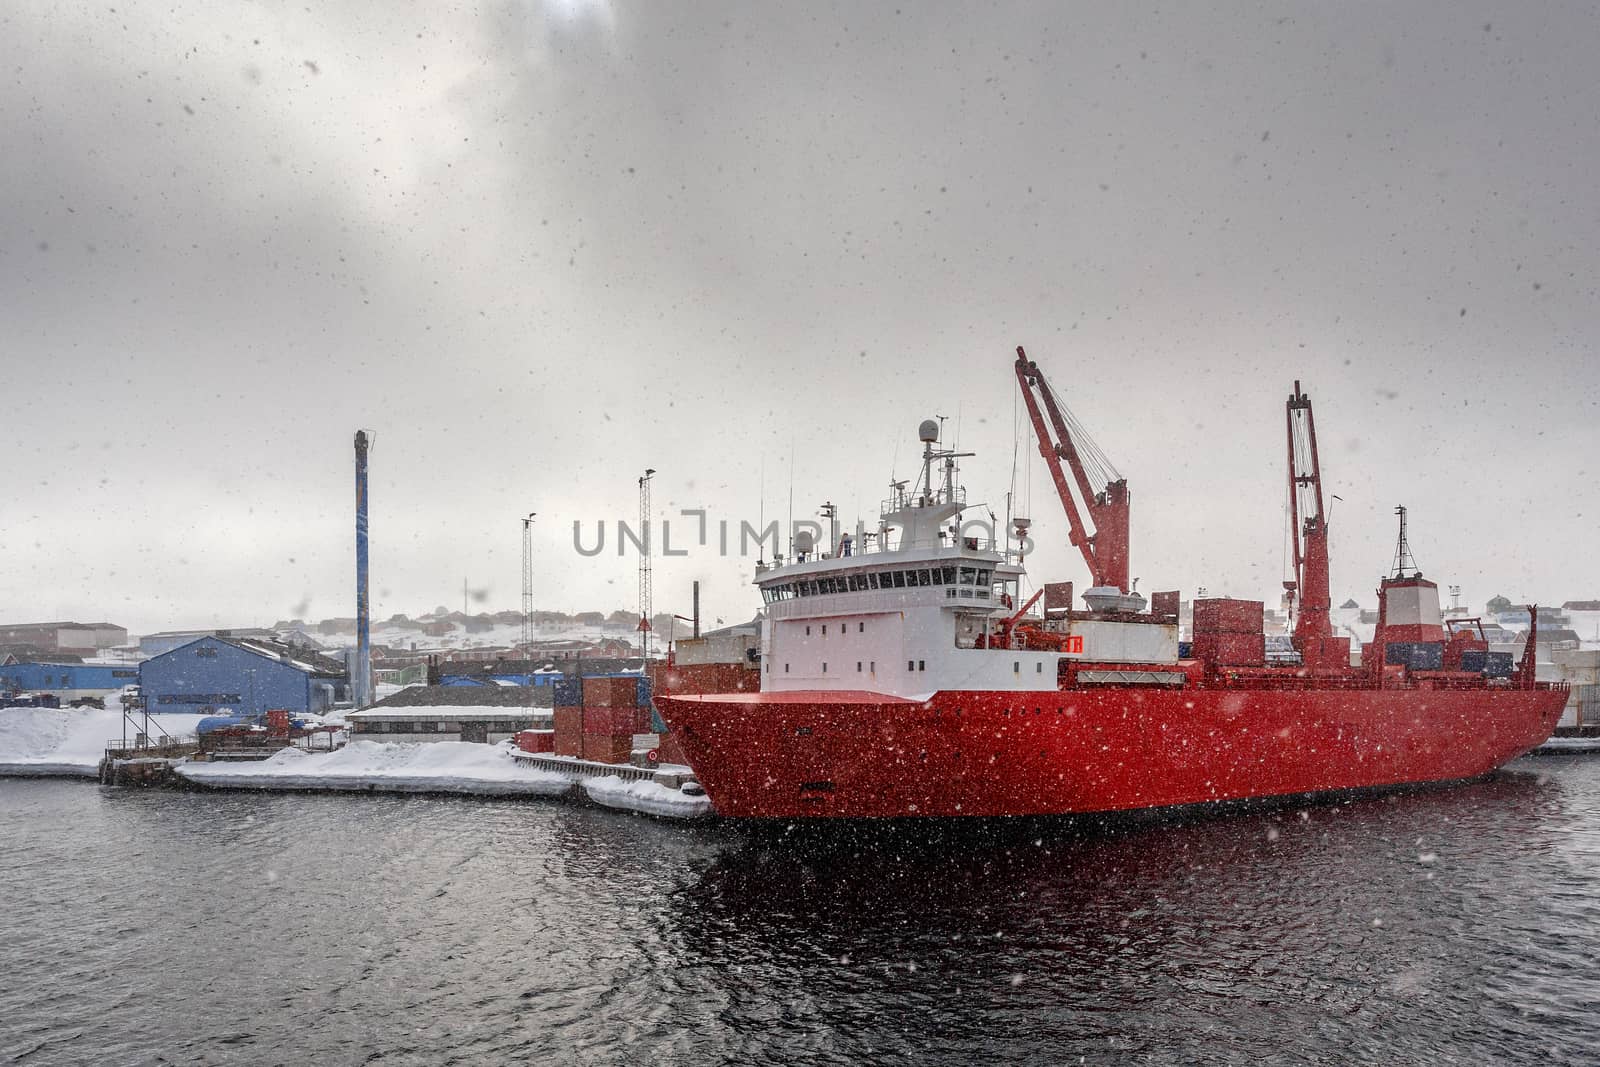 Big red cargo ship under the heavy snowfall in the port of Aasiaat, Greenland